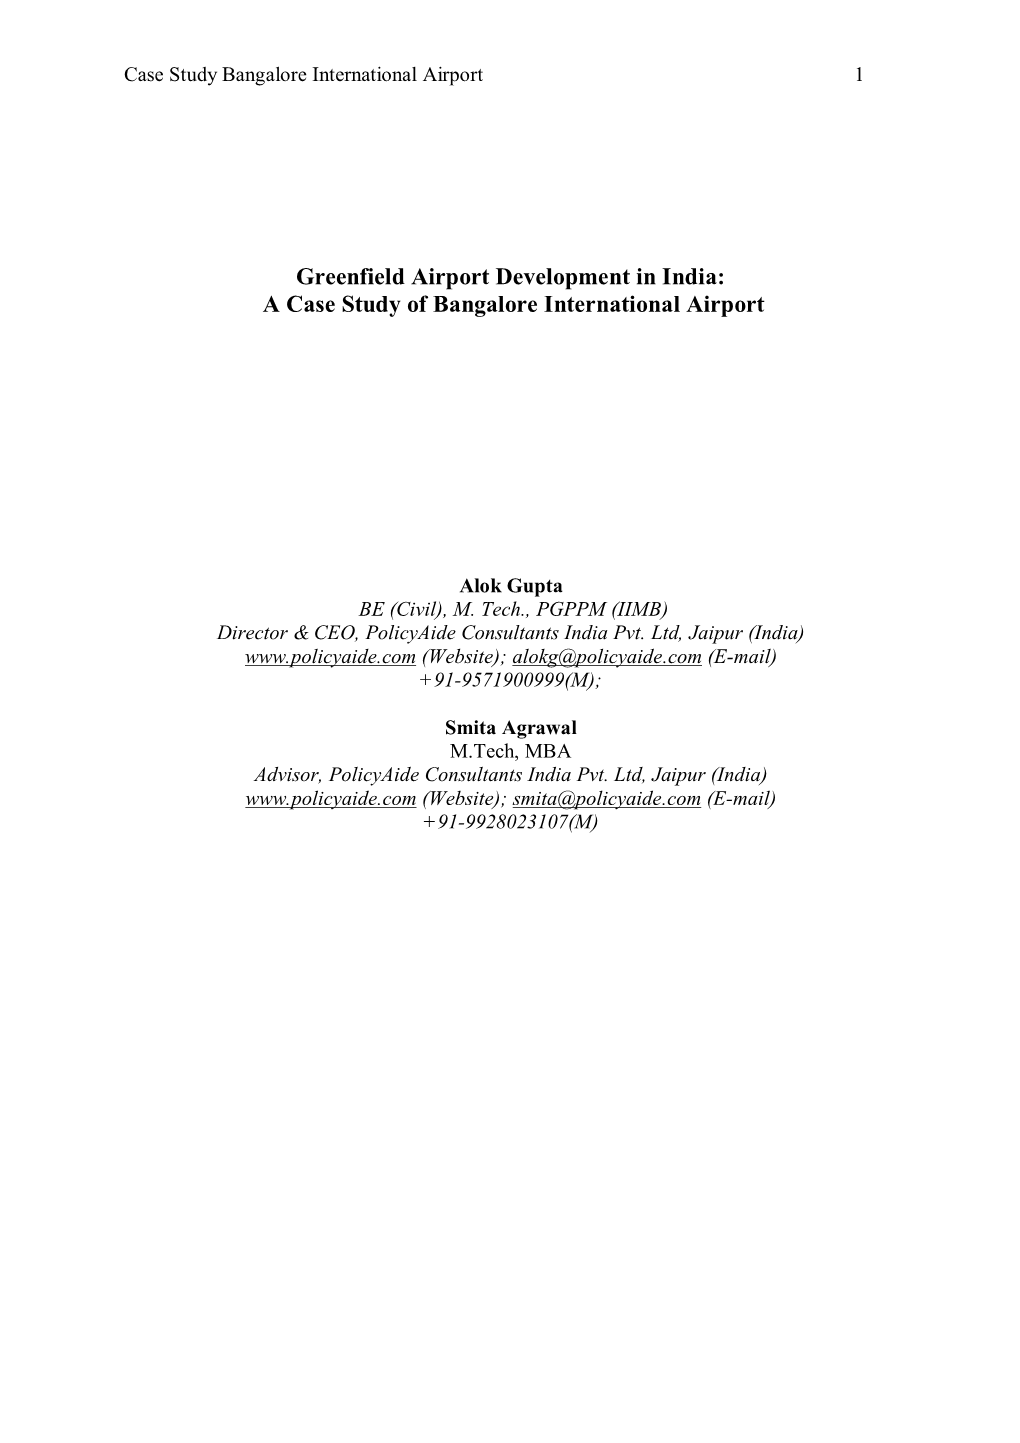 Greenfield Airport Development in India: a Case Study of Bangalore International Airport